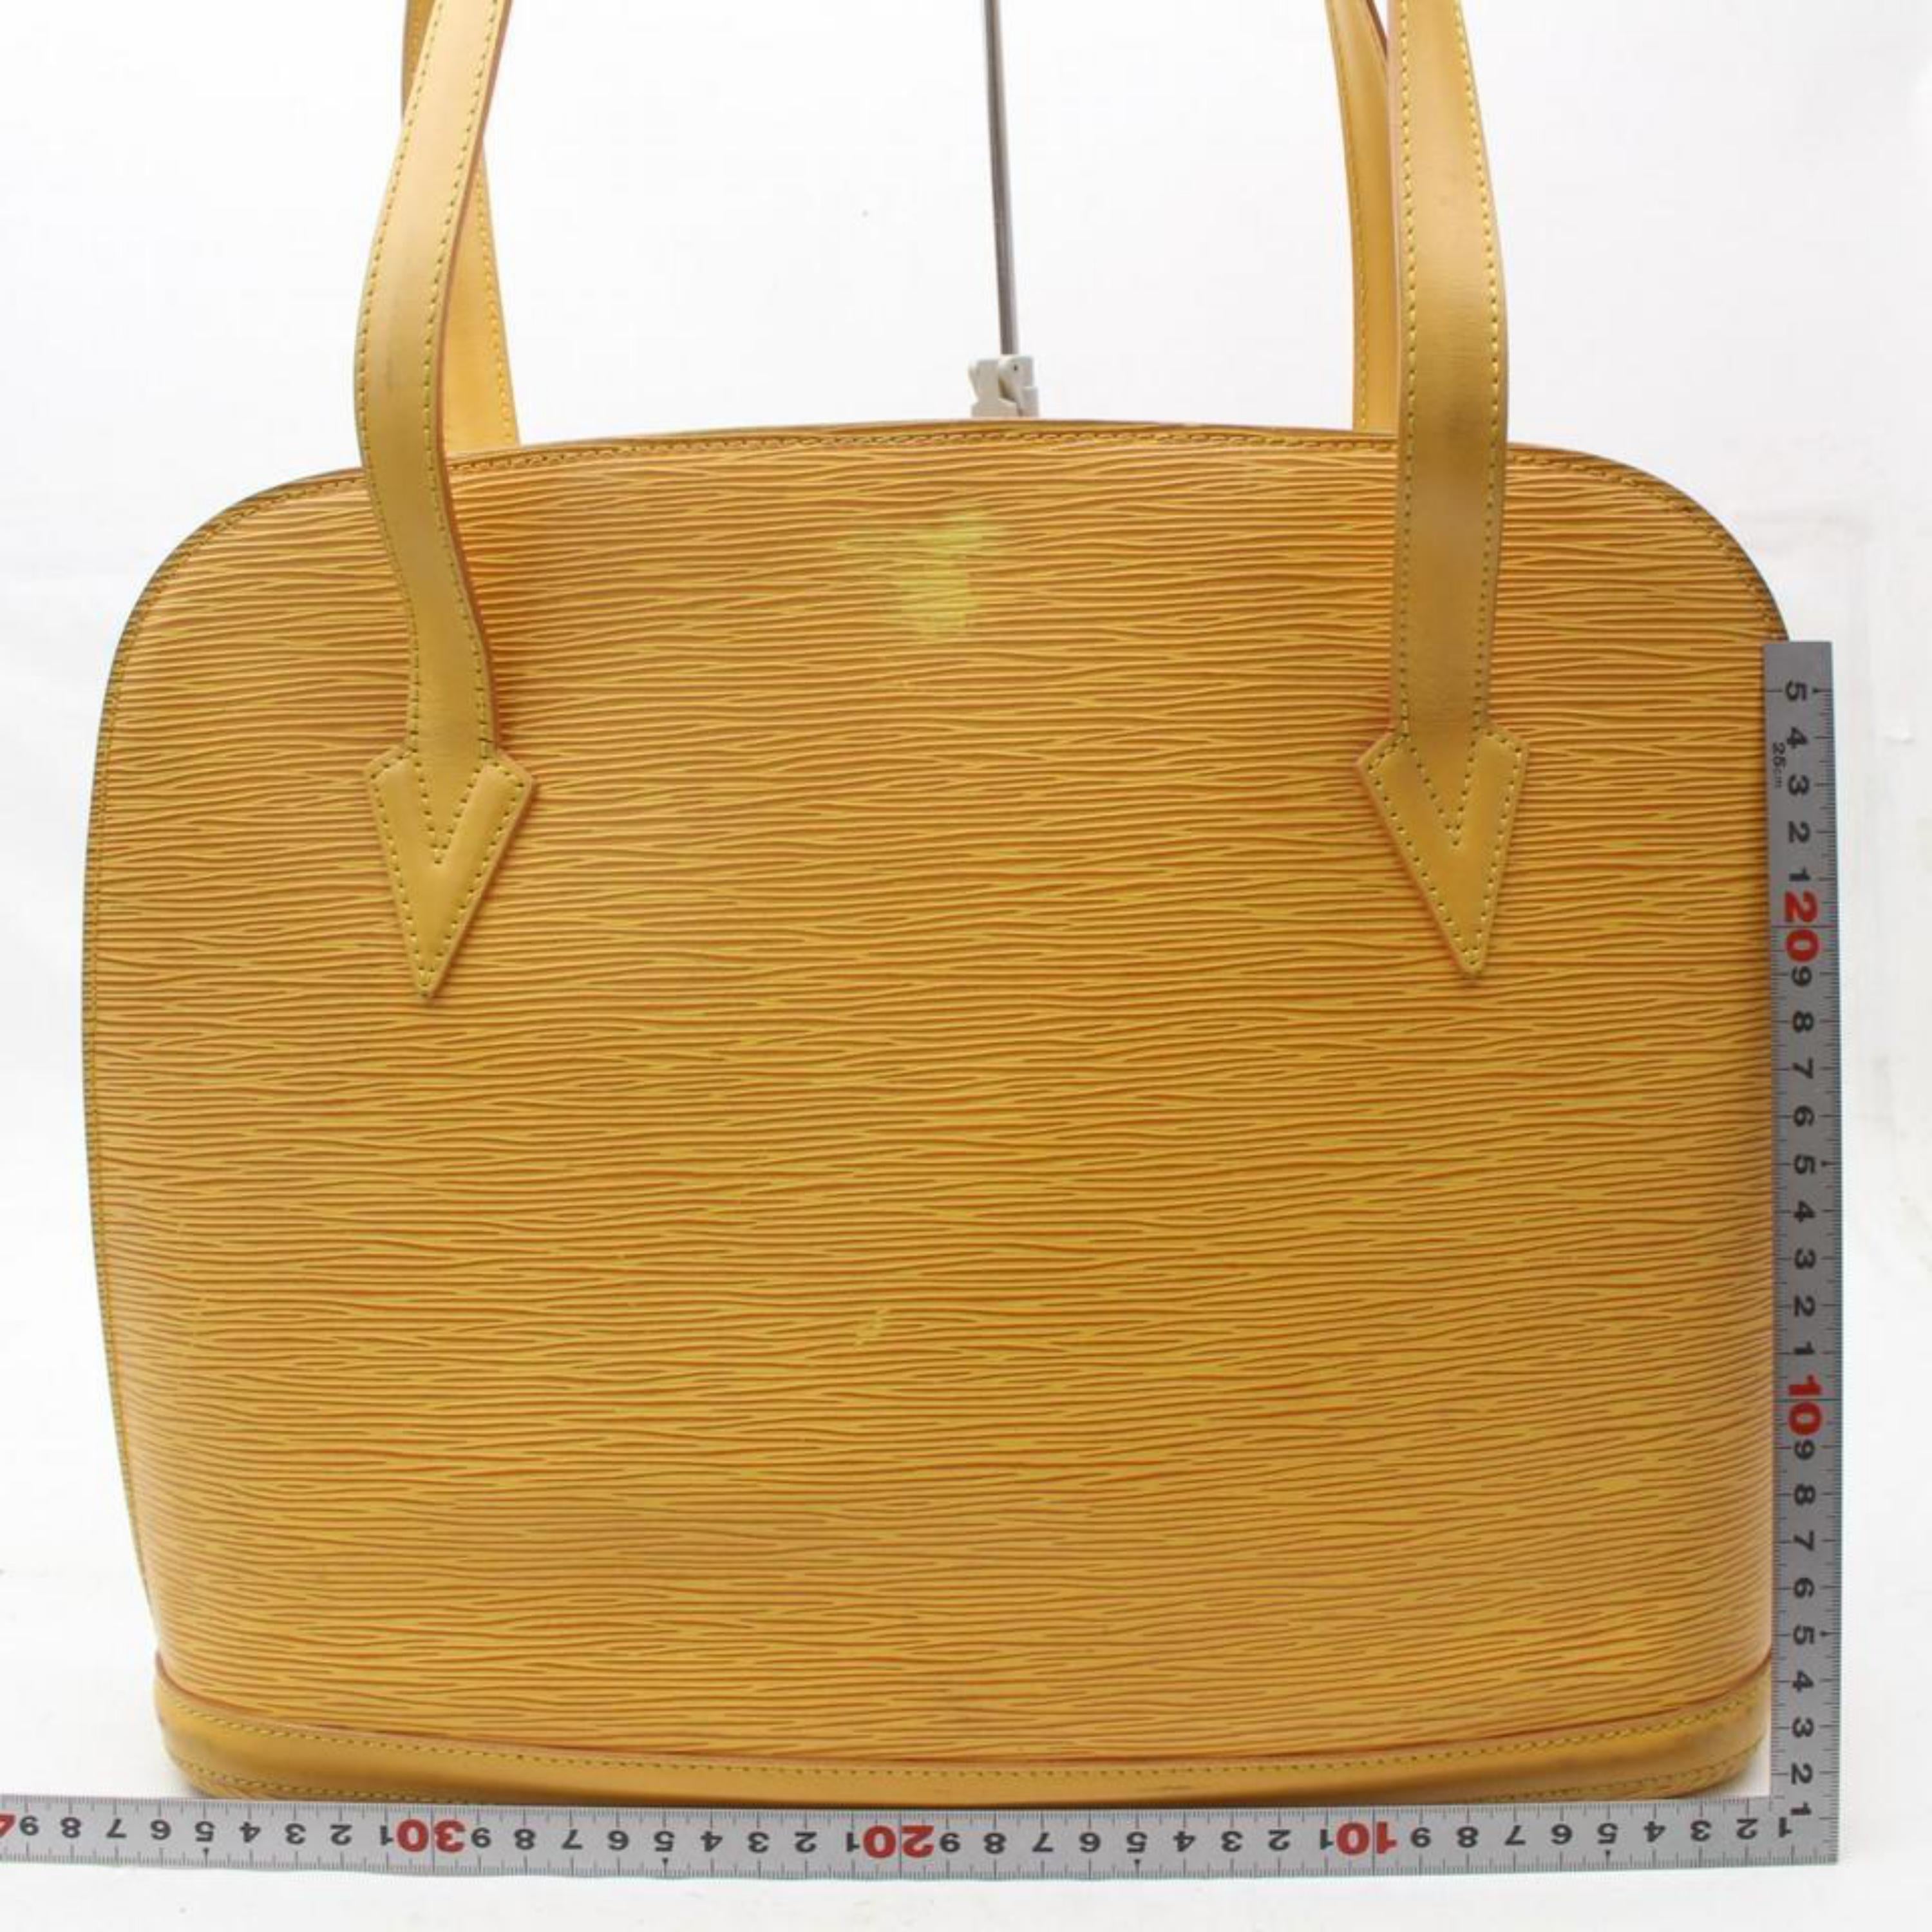 Louis Vuitton Lussac Tassil Zip Tote 869647 Yellow Leather Shoulder Bag For Sale 2